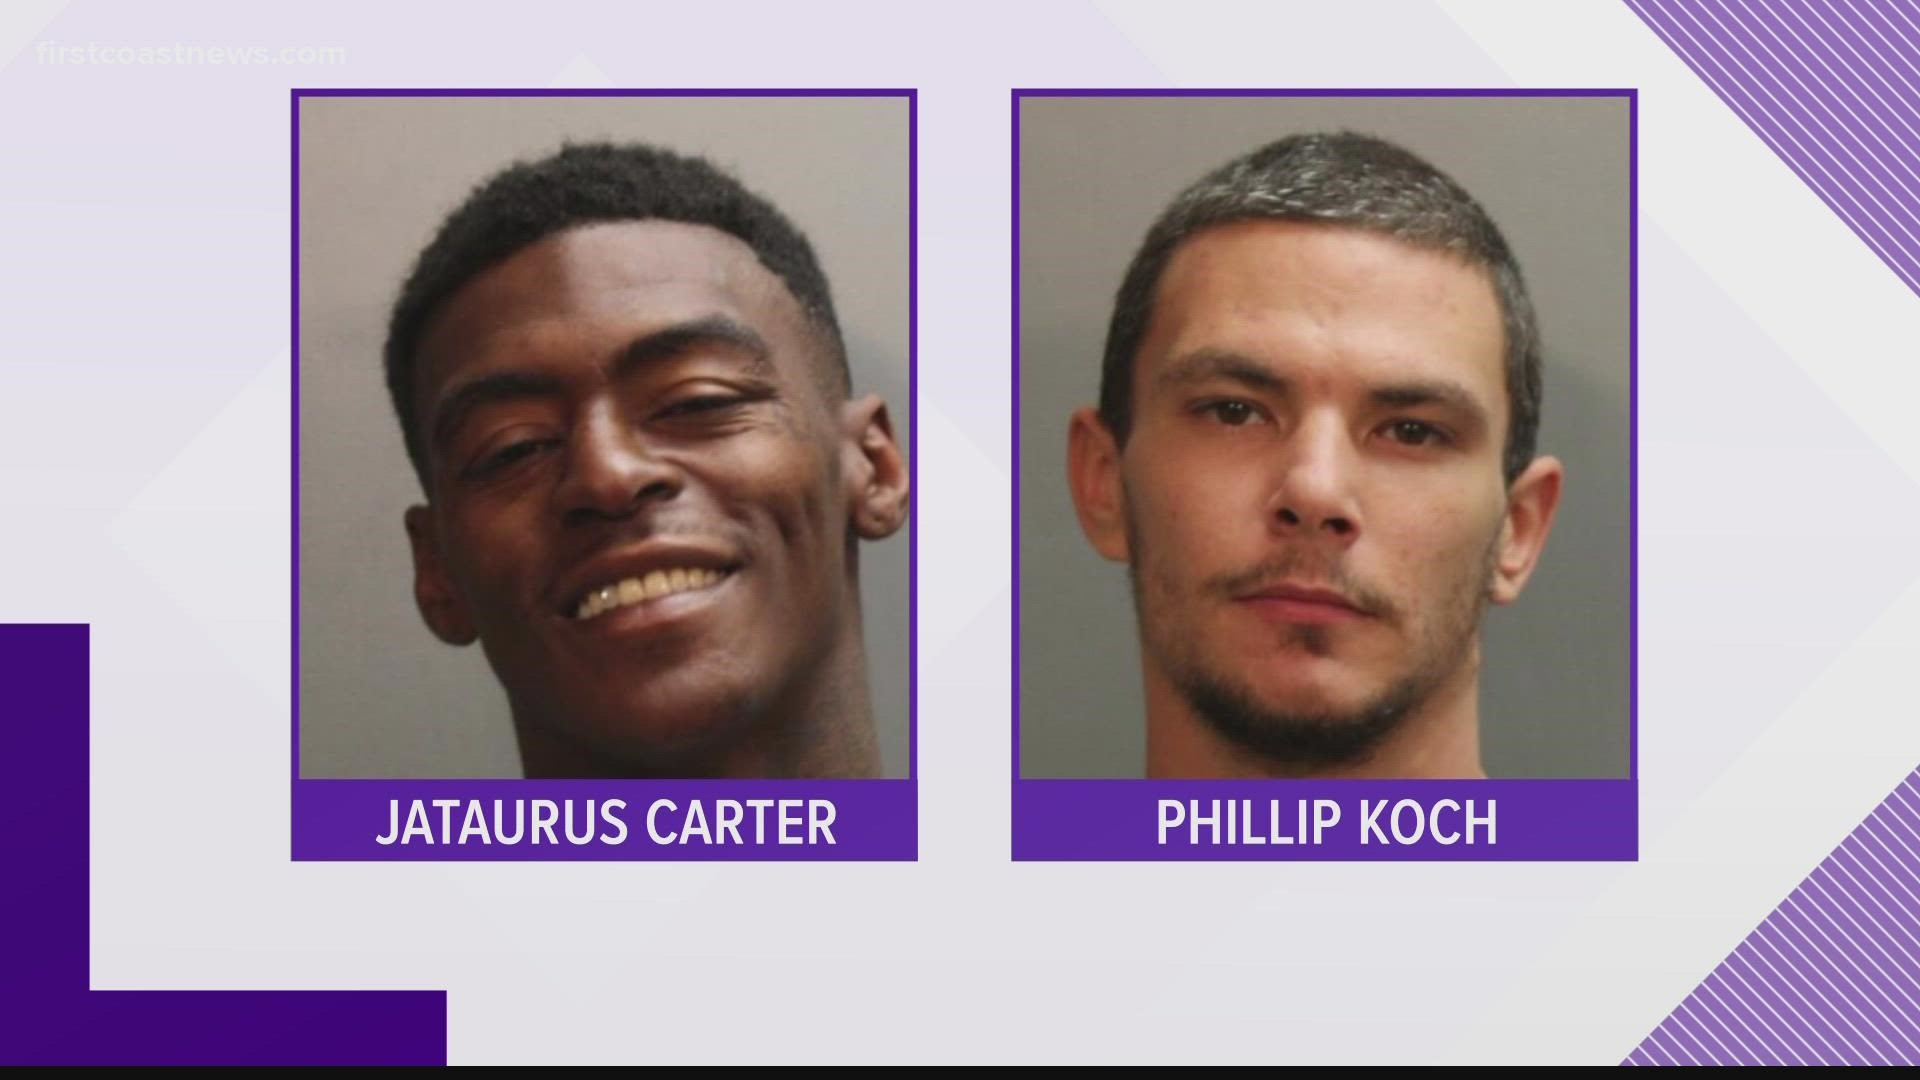 Phillip Koch, 31, and Jataurus Carter, 28, were arrested in connection to the armed carjacking.